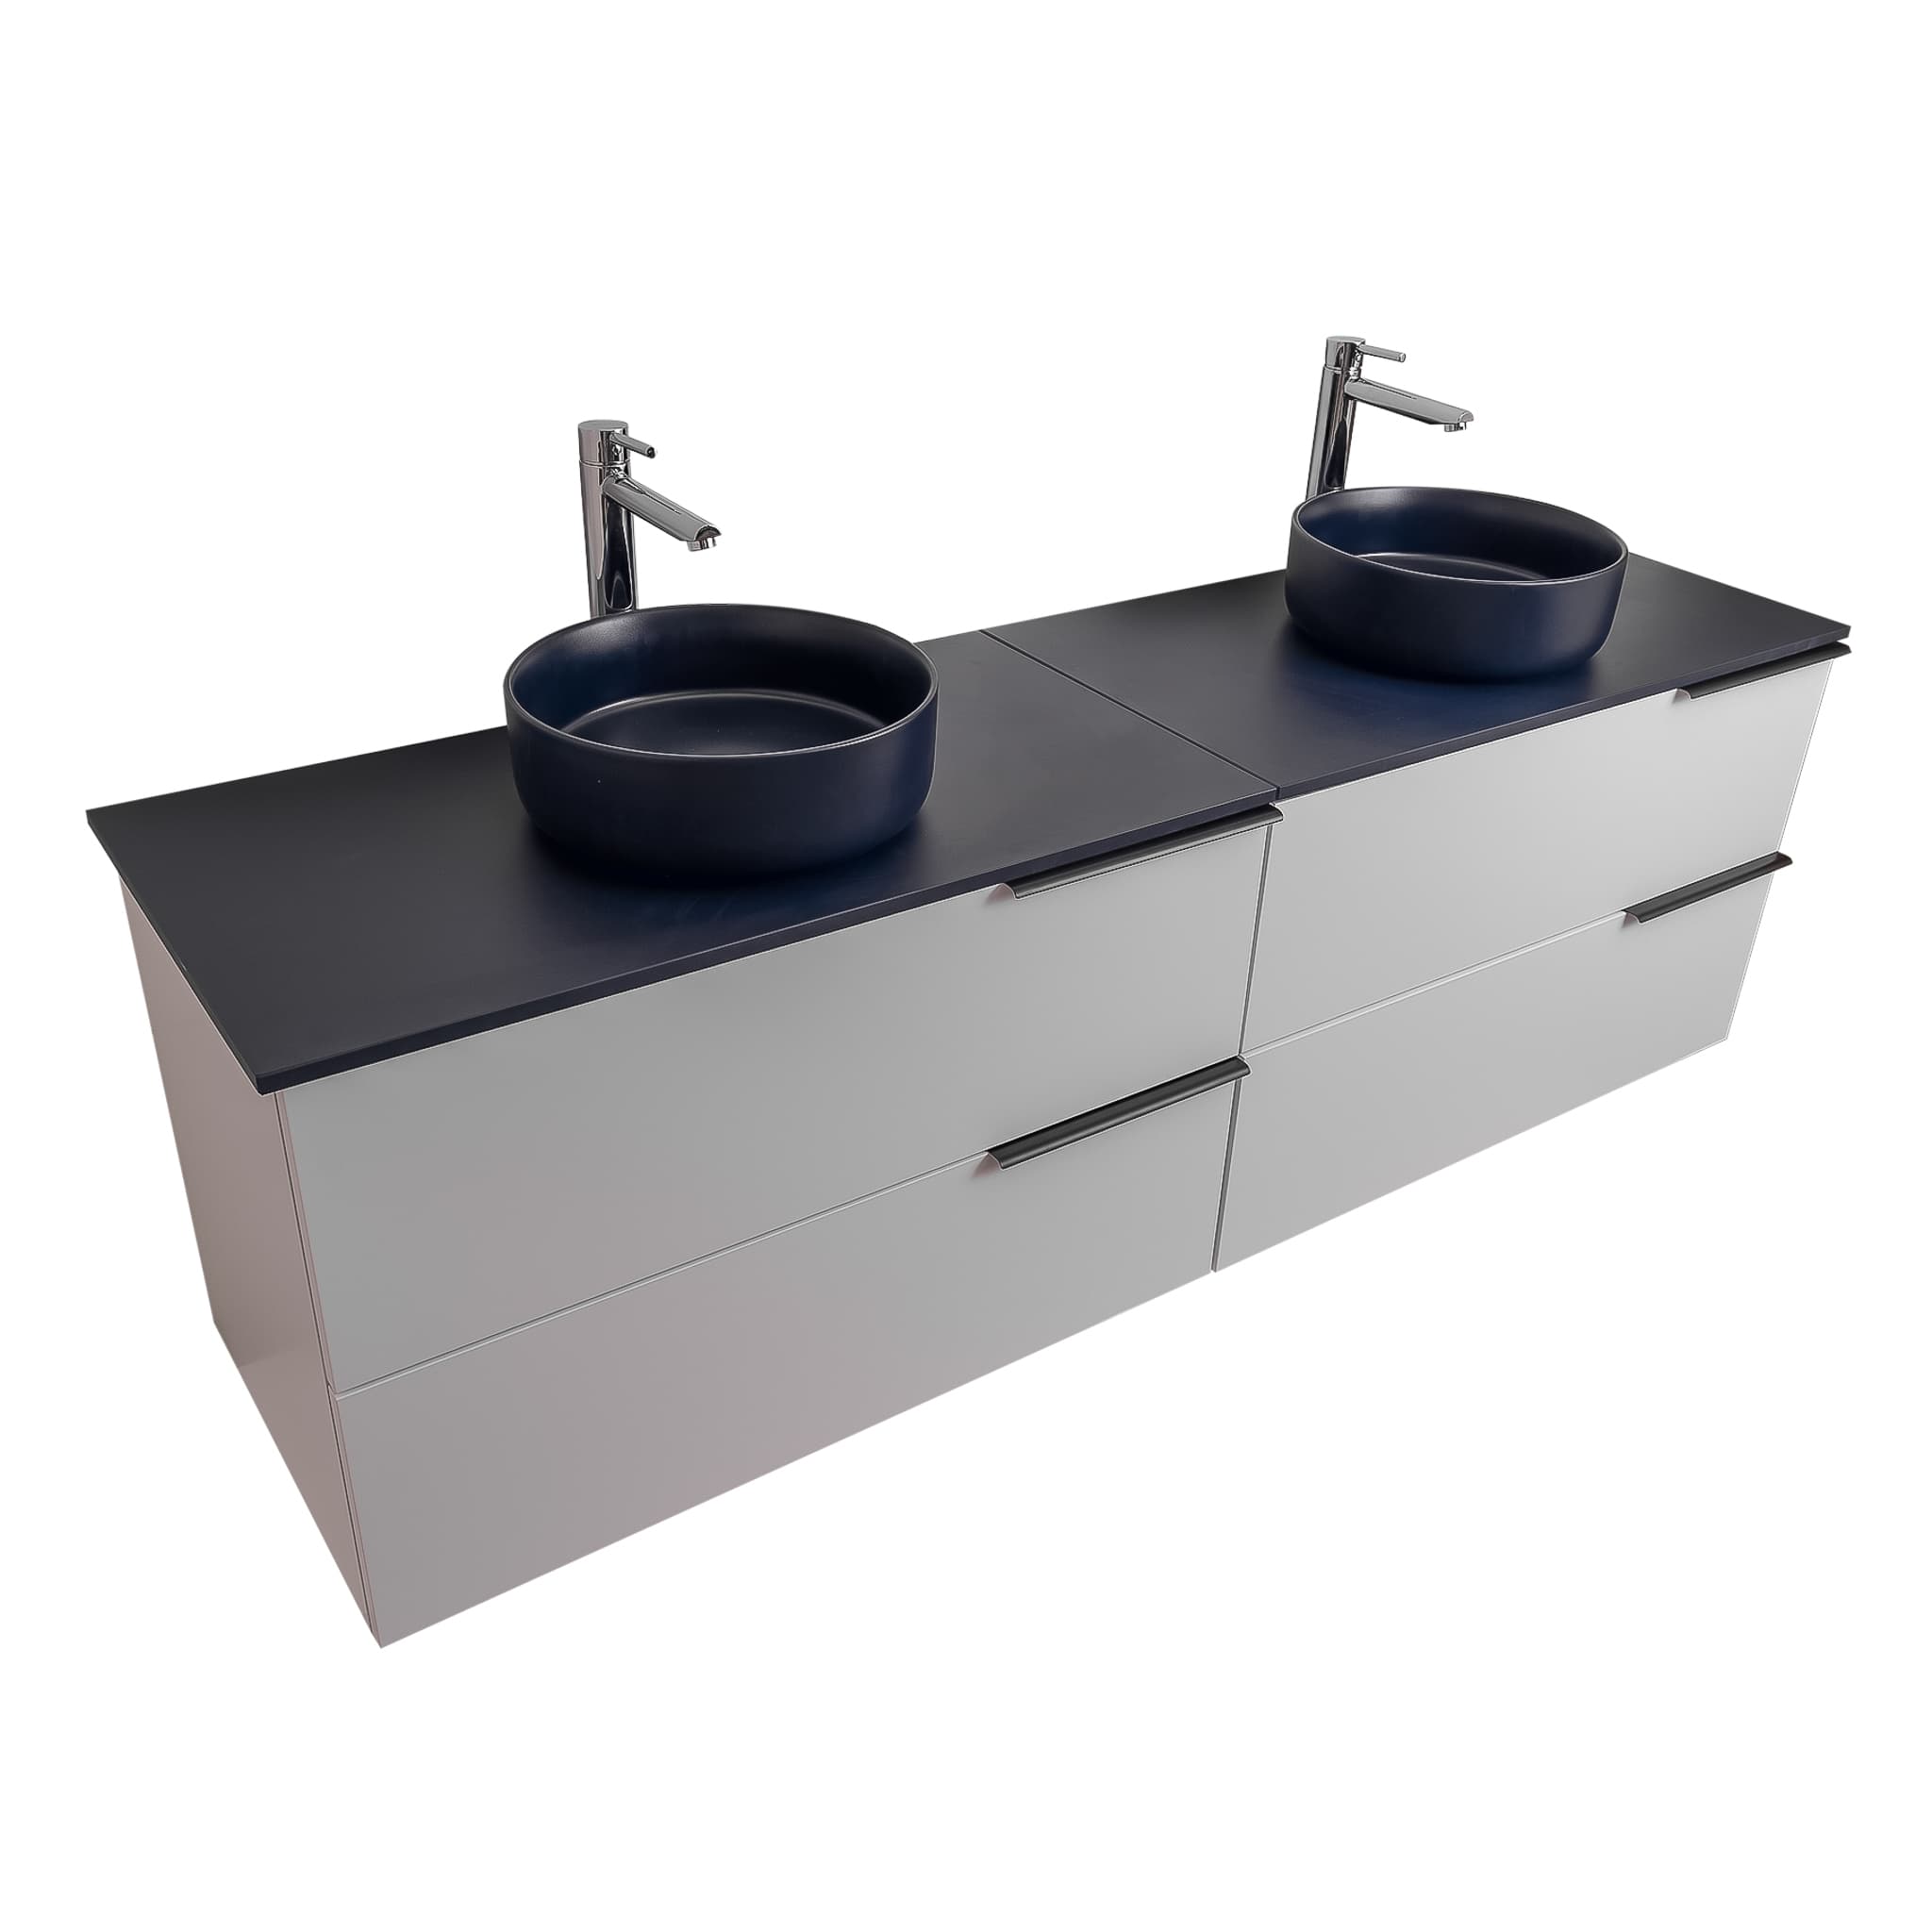 Mallorca 72 Matte White Cabinet, Ares Navy Blue Top And Two Ares Navy Blue Ceramic Basin, Wall Mounted Modern Vanity Set